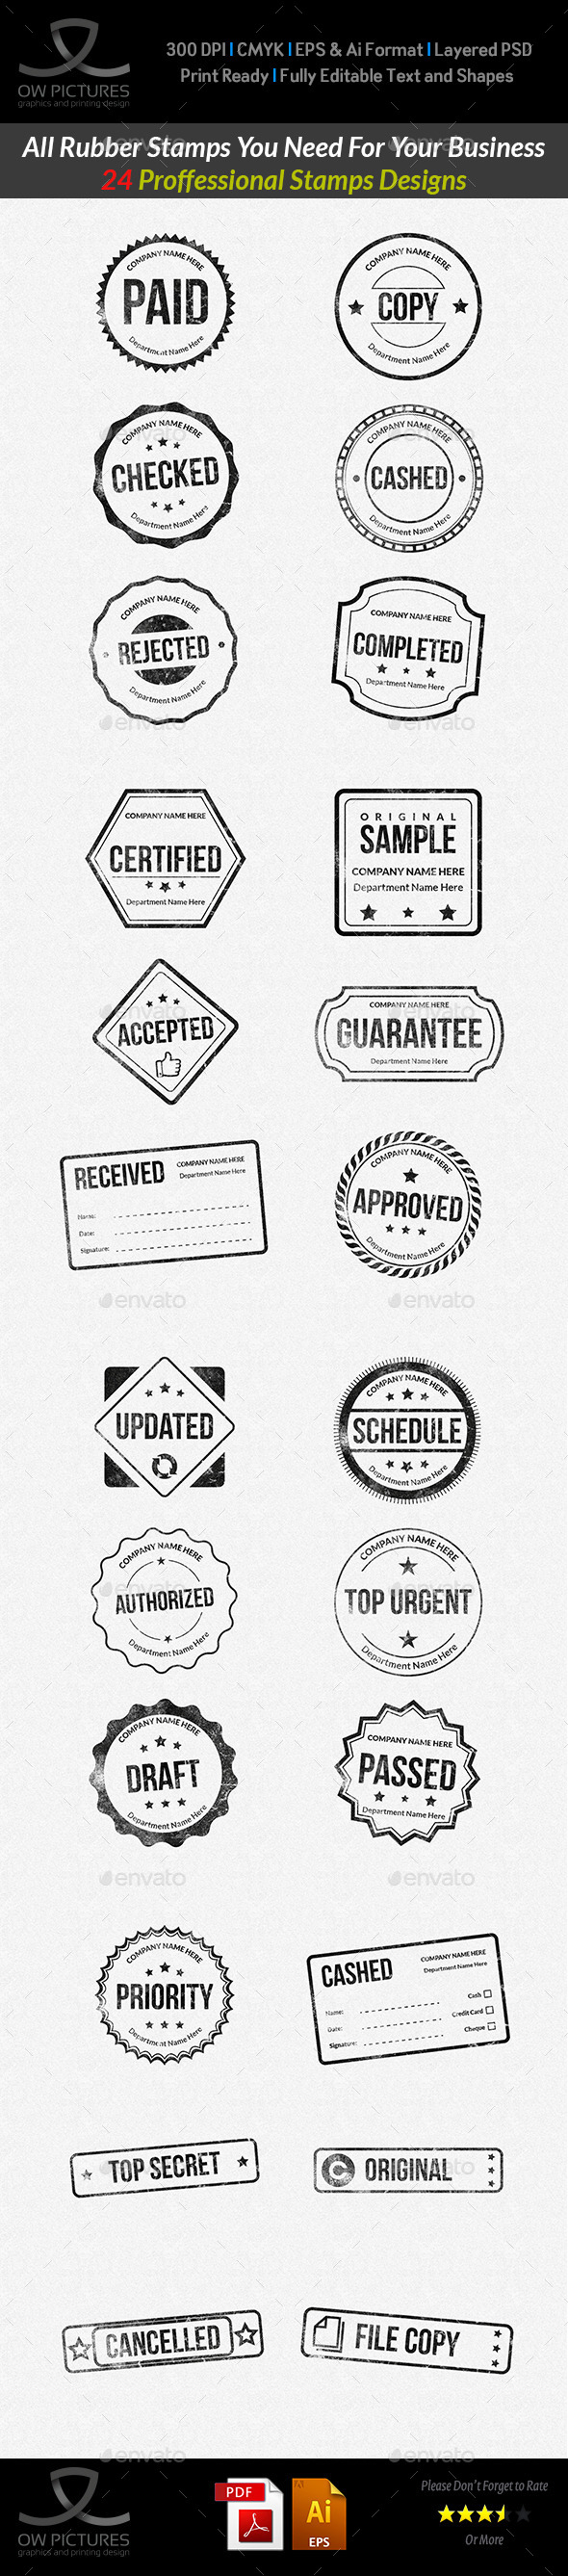 Rubber Stamp Collection Design Template Graphic by OWPictures